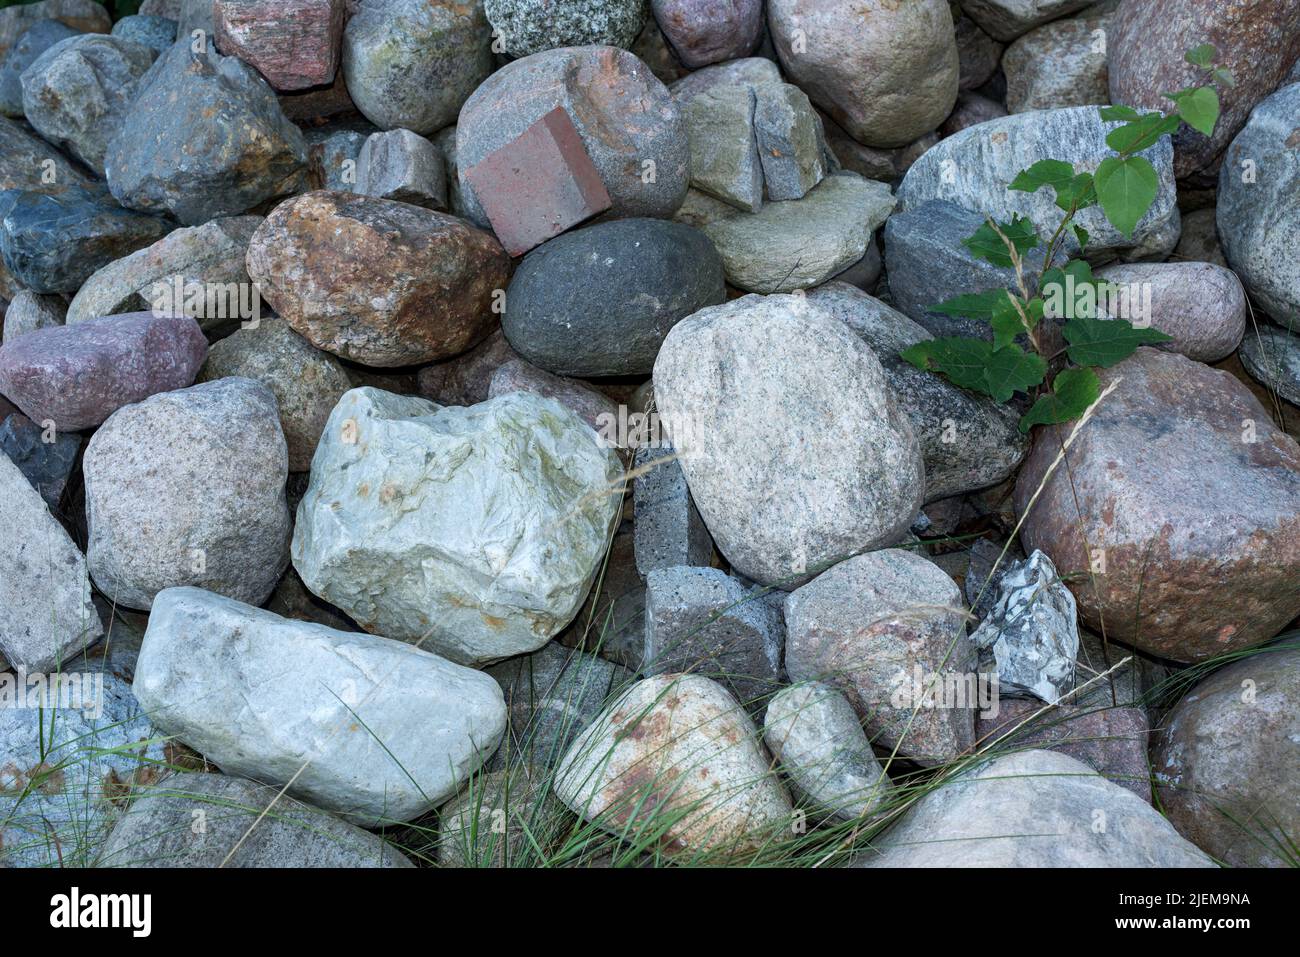 Zoomed pile of large stones or rocks with green plants growing between. Above view of rocky landscape along a remote hiking trail in nature. Scenic Stock Photo